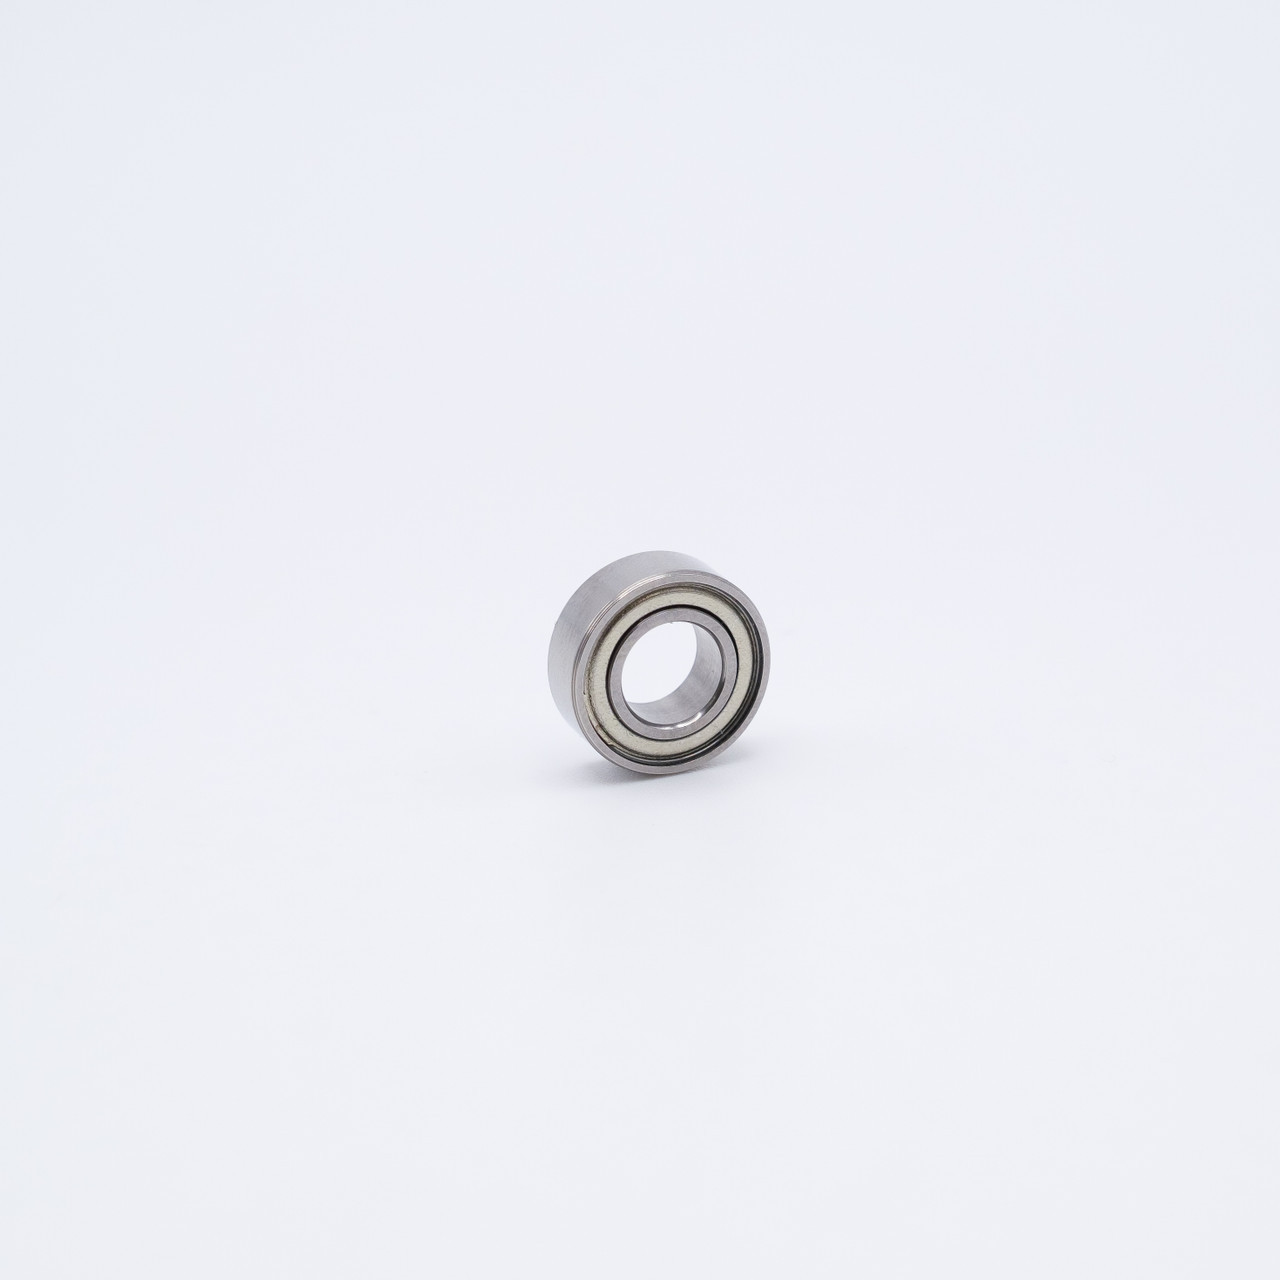 SMR83-ZZ Stainless Steel Miniature Ball Bearing 3x8x3mm Left Angled View